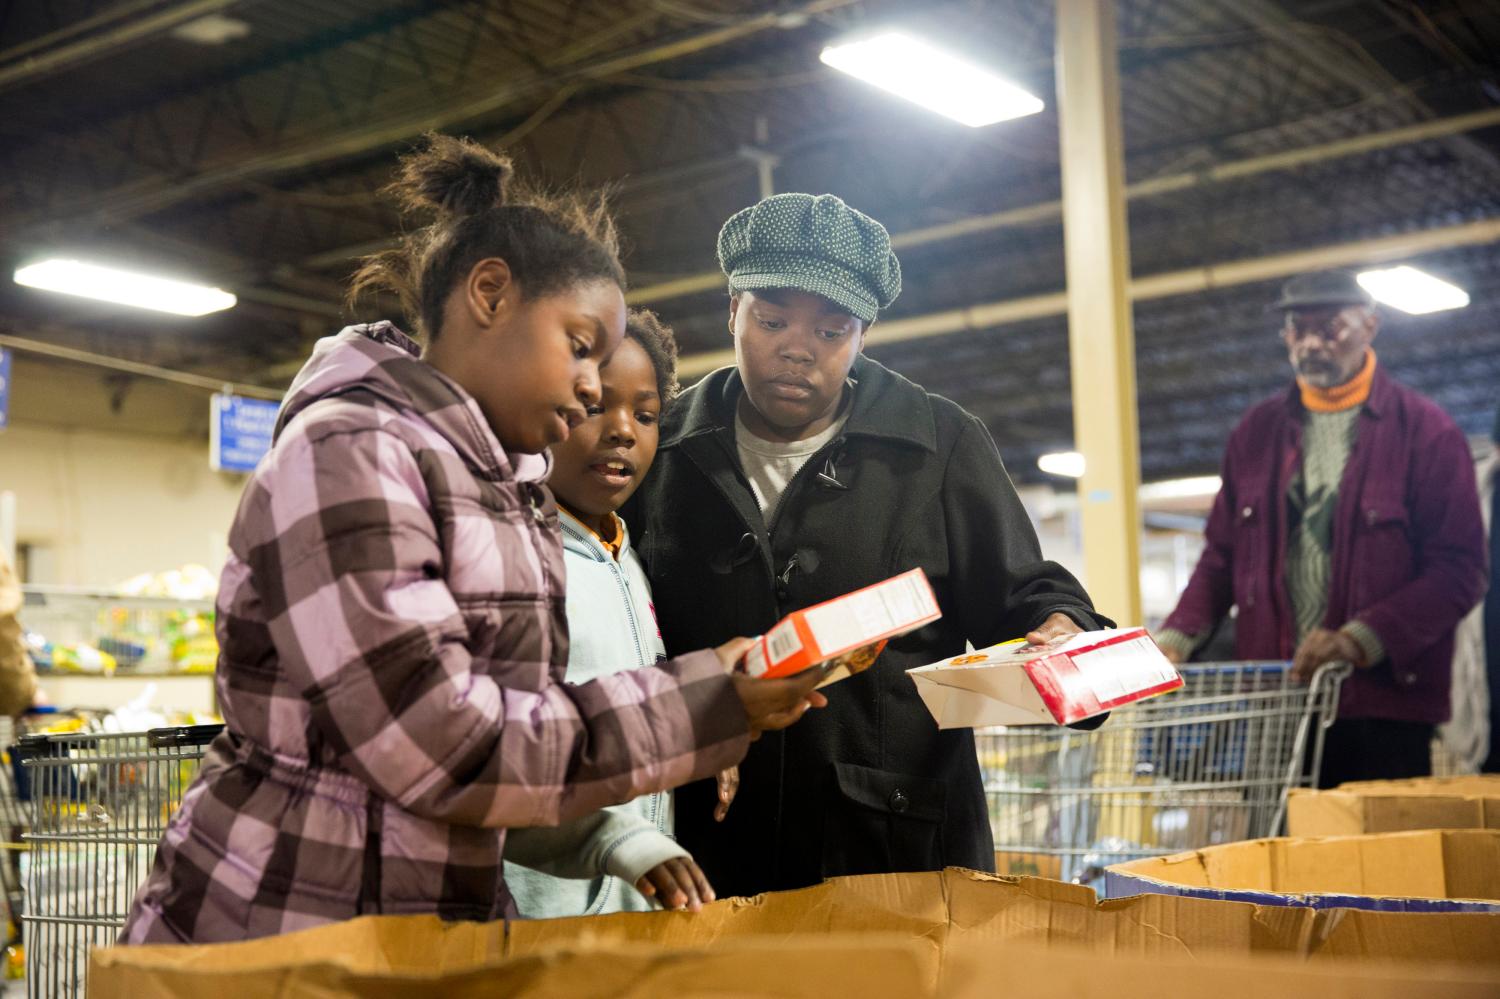 Miller compares items with her daughters at St. Vincent de Paul food pantry in Indianapolis